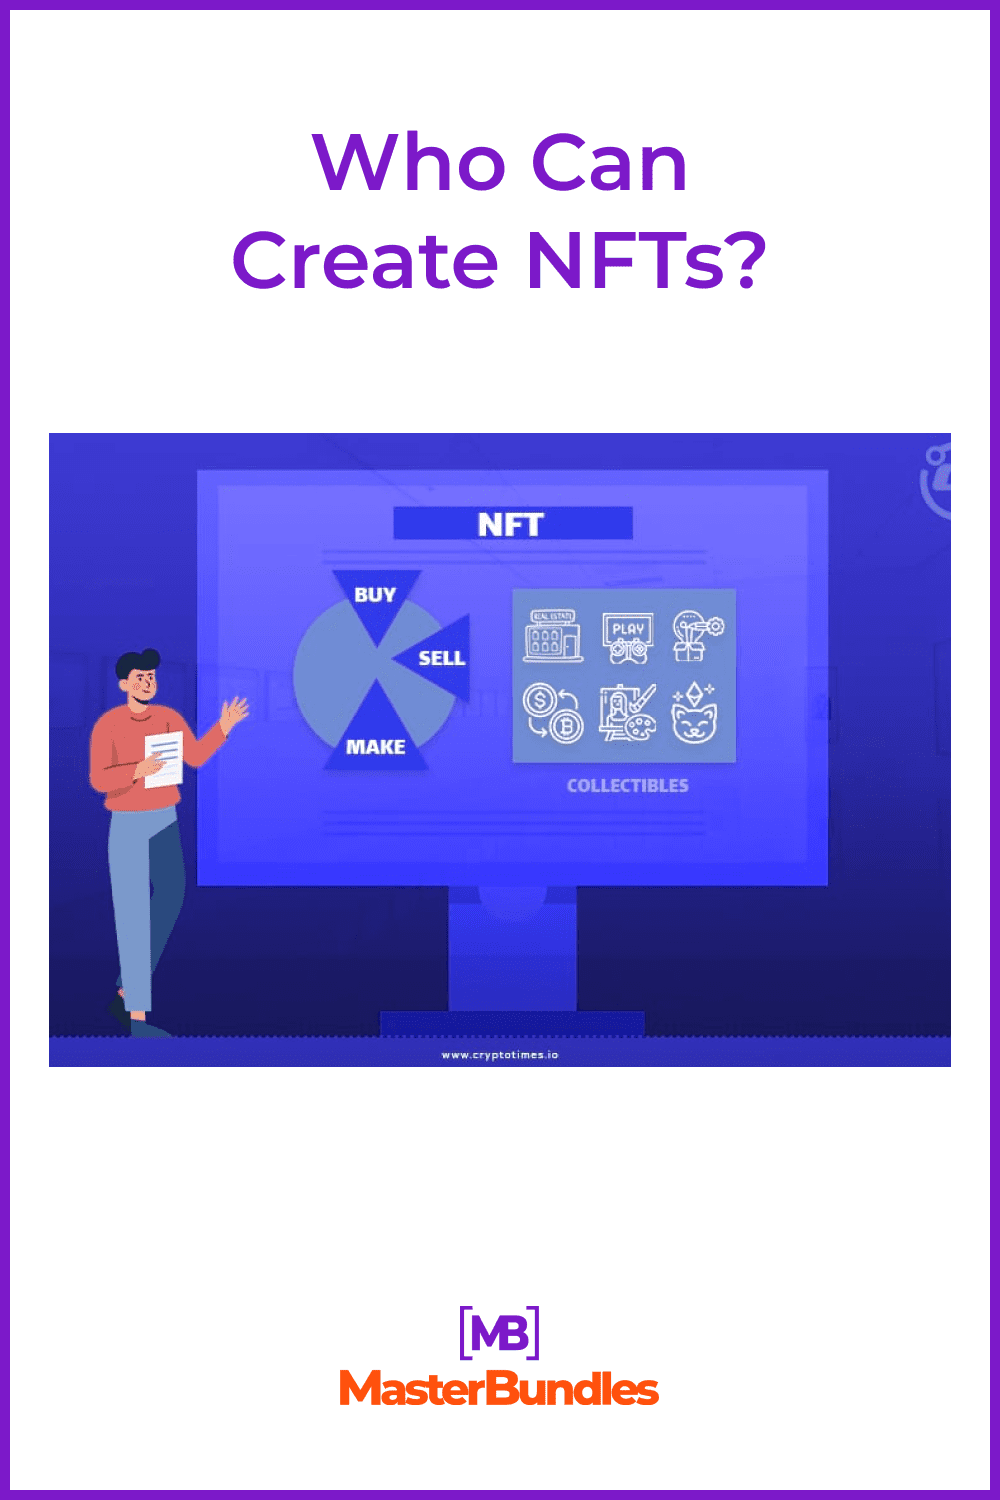 Who Can Create NFTs.